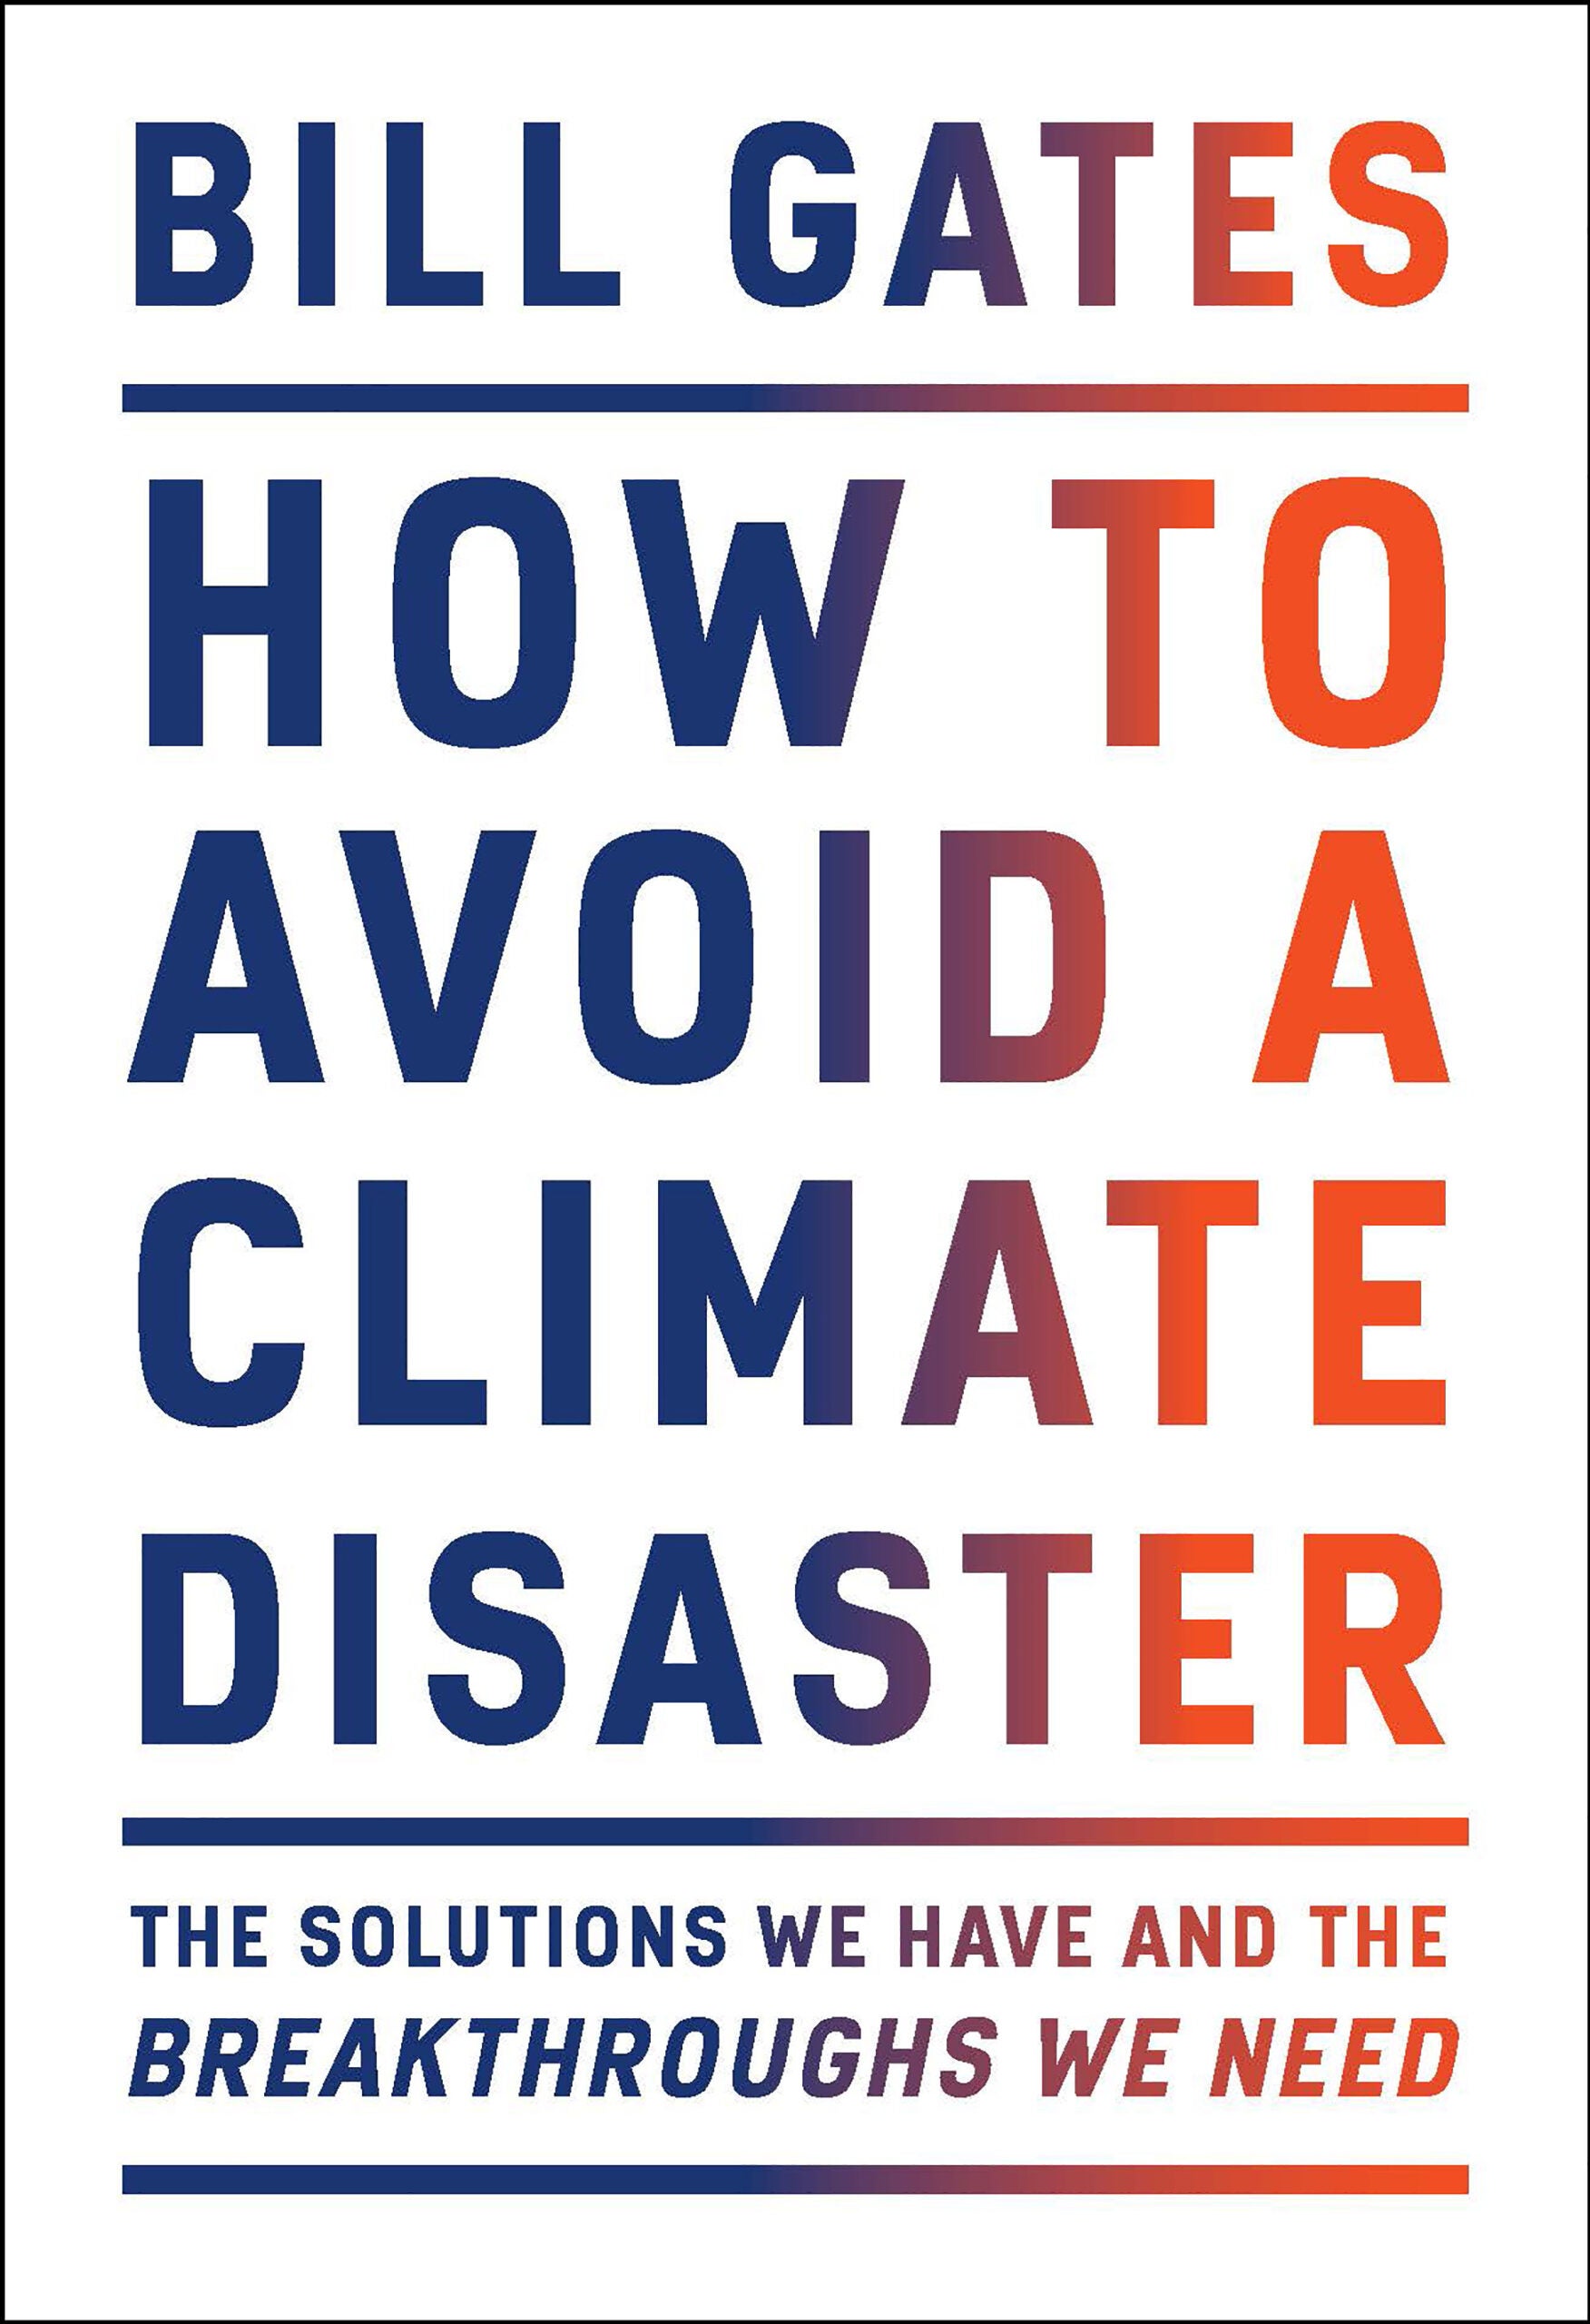 Cover Art and Release Date Revealed for Bill Gates’ HOW TO AVOID A CLIMATE DISASTER